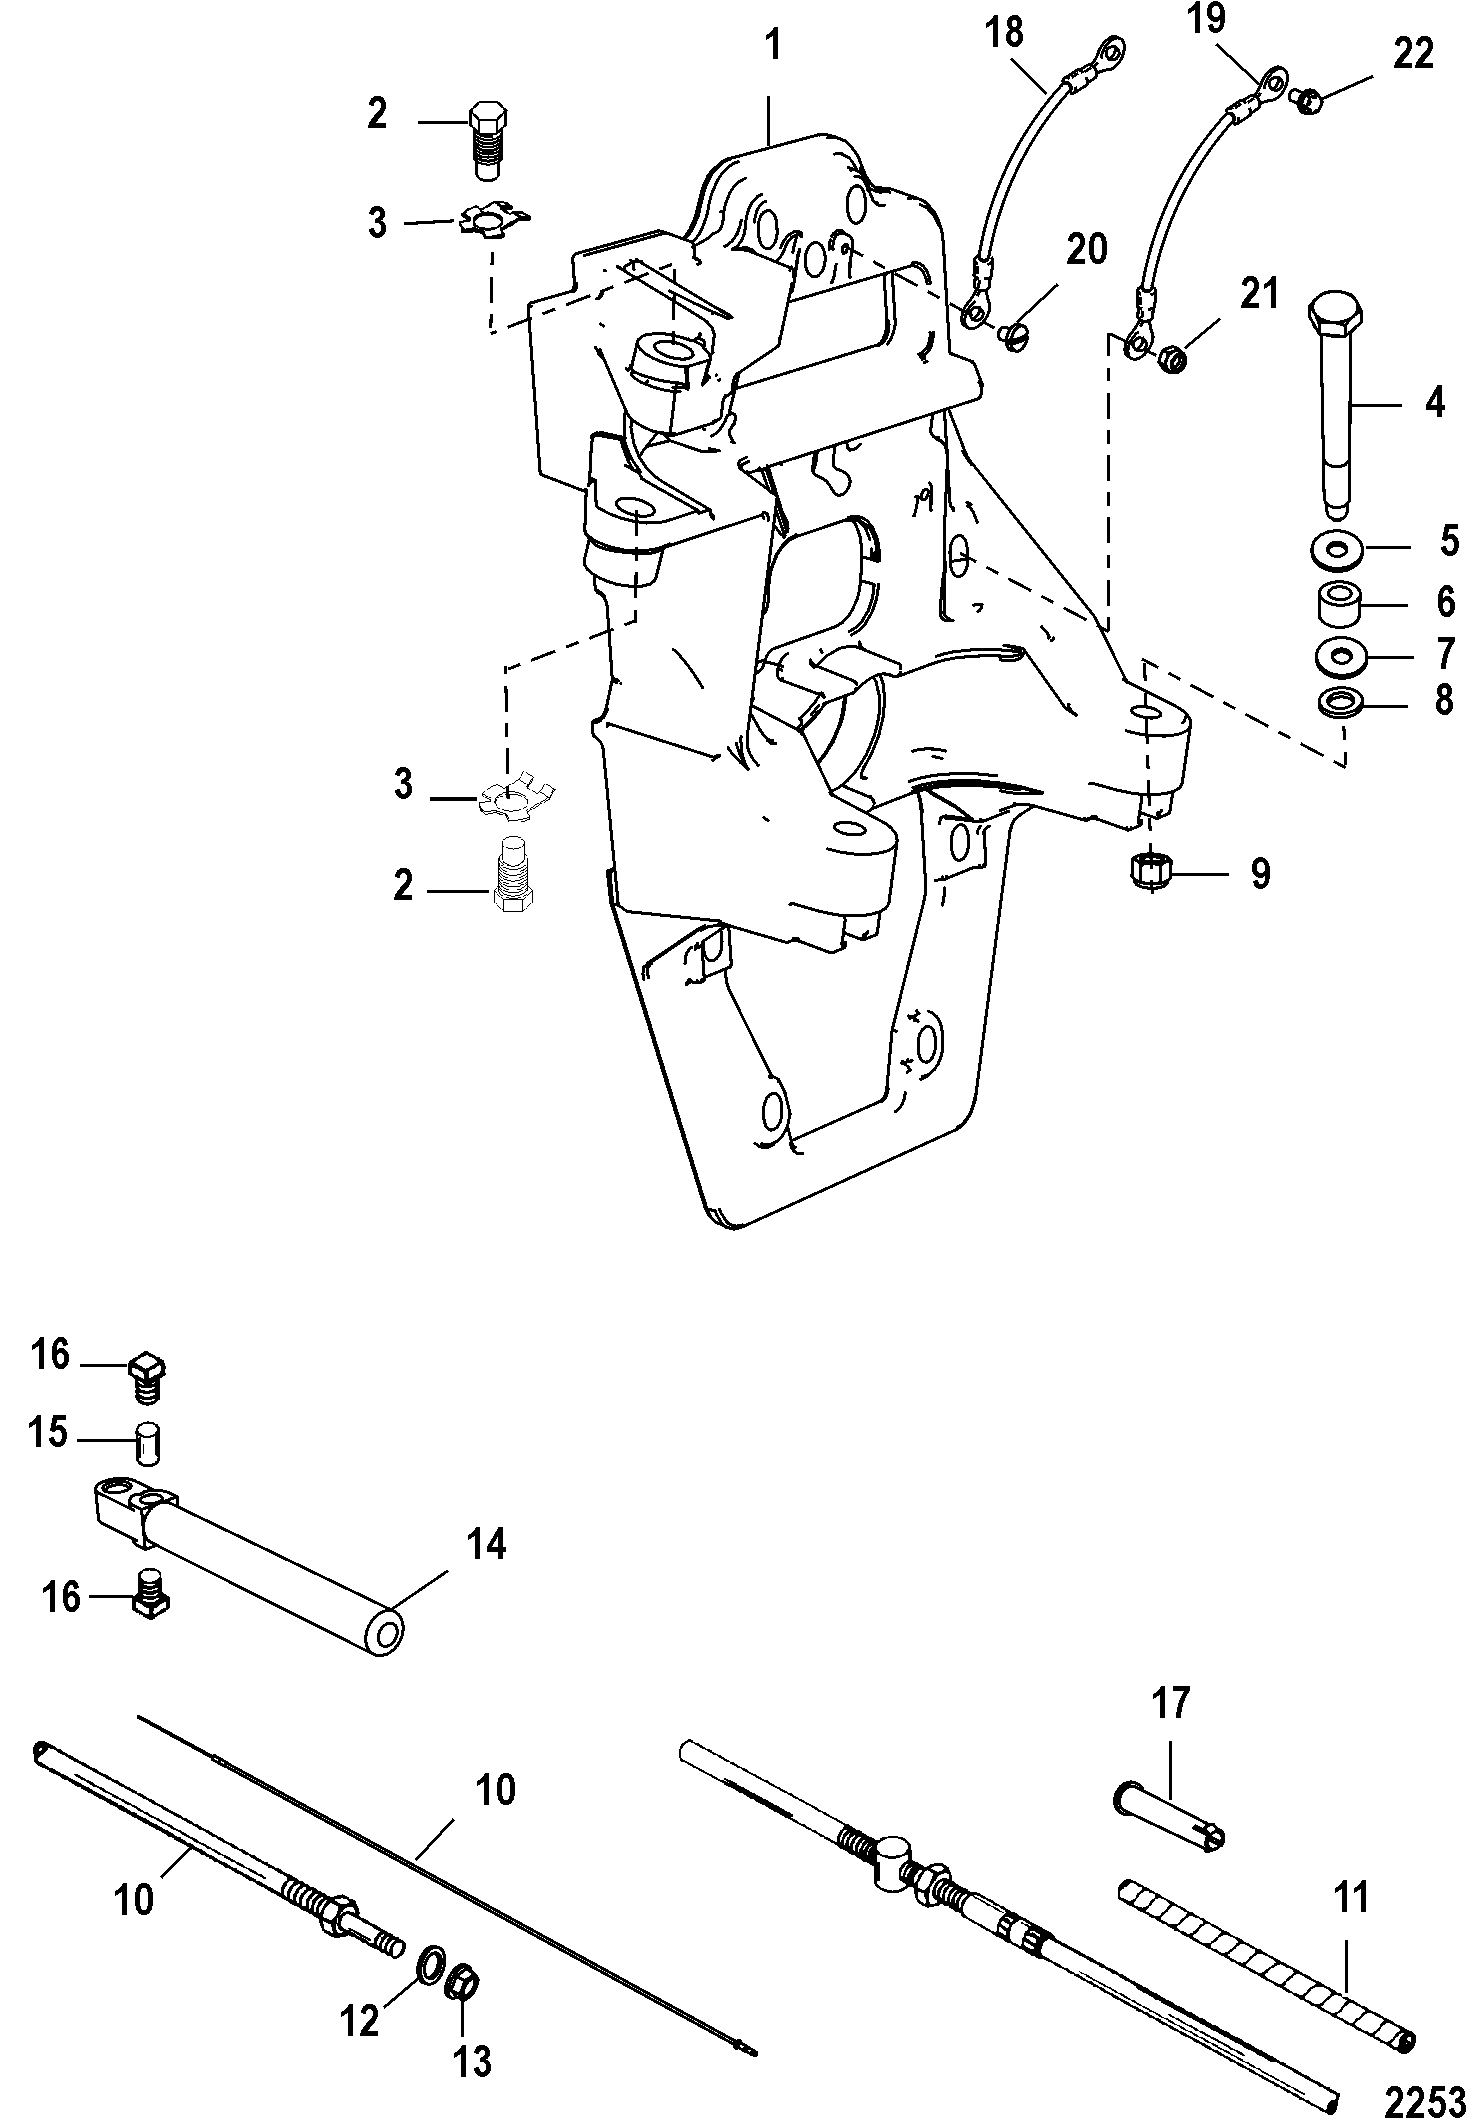 Transom Plate And Shift Cable